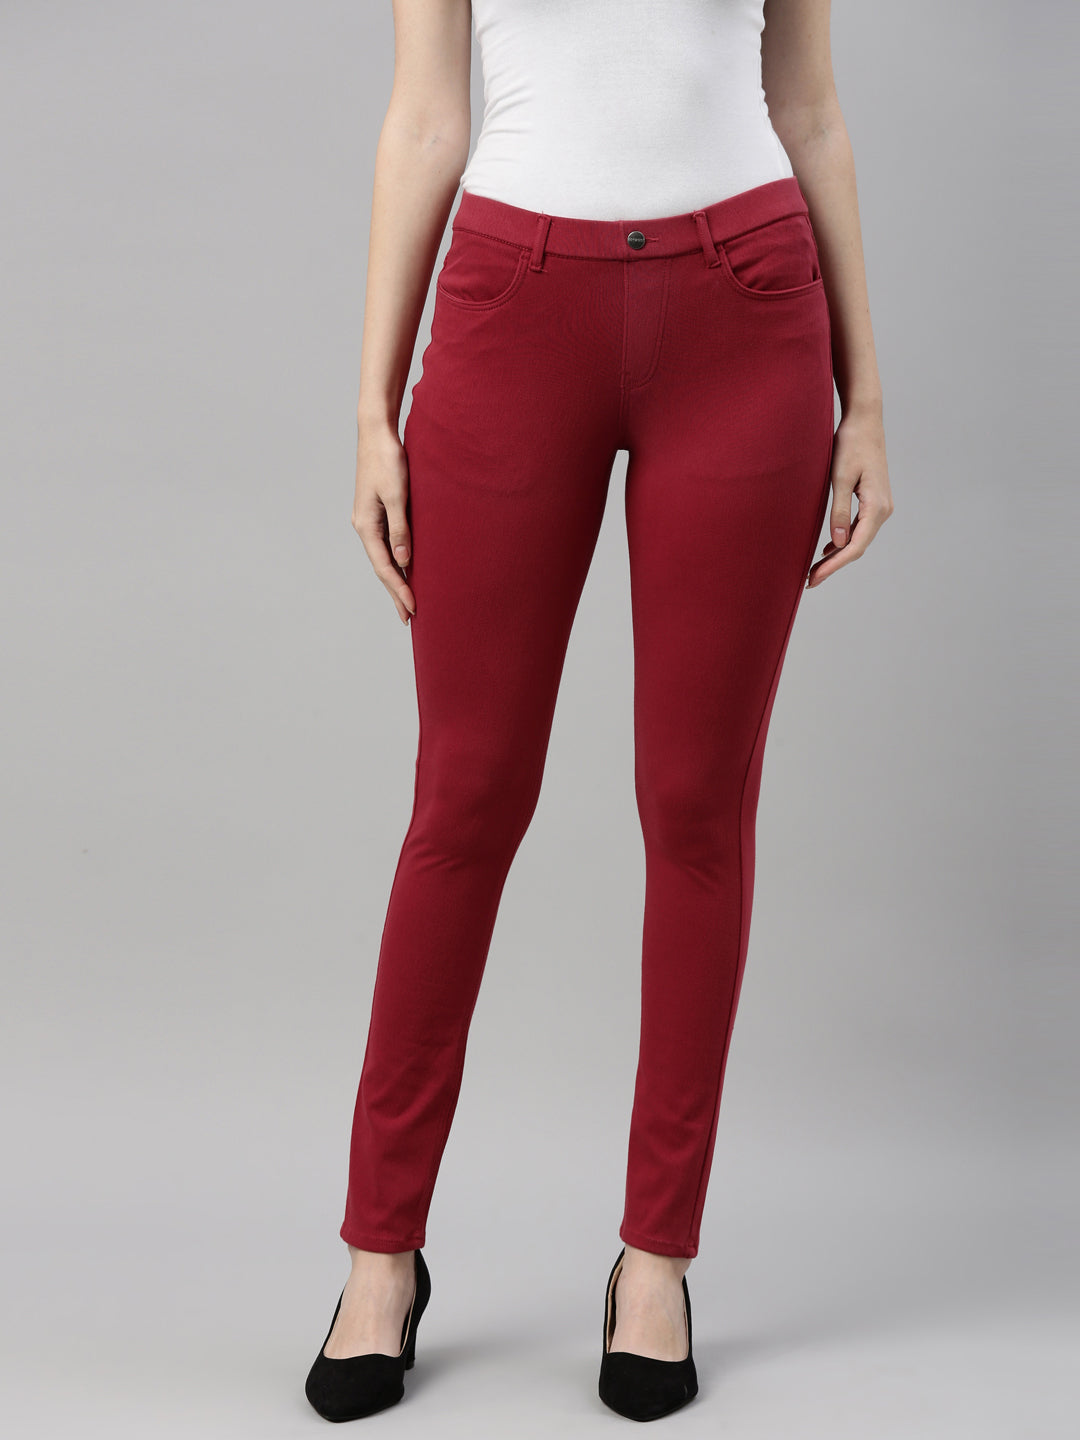 Jeggings  Buy Jeggings Online in India - W for Woman